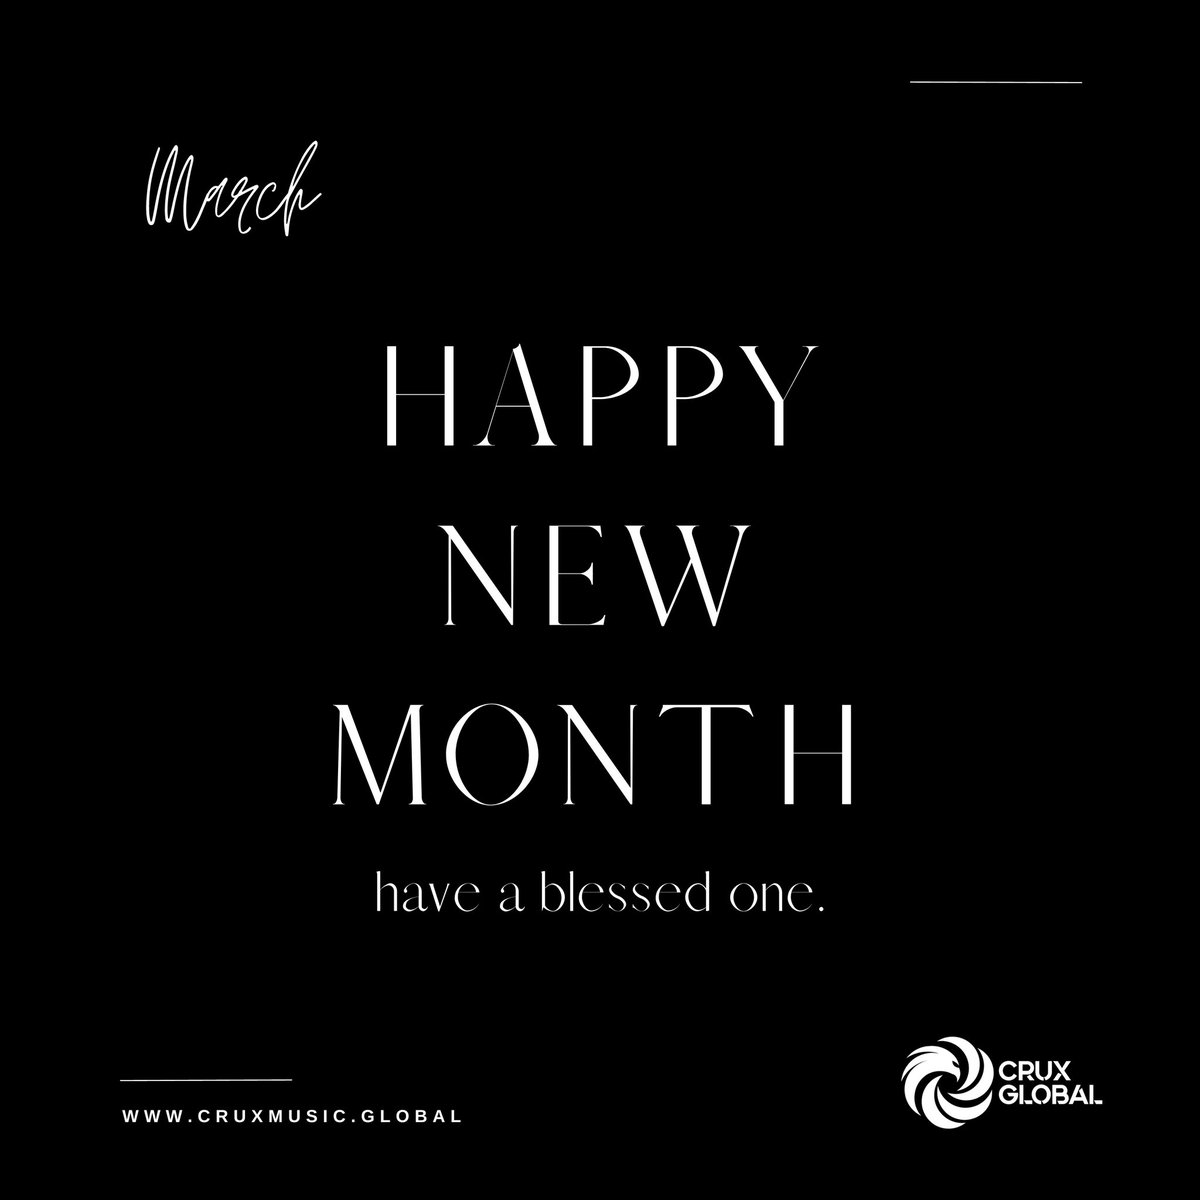 As We Welcome a New Month, Let’s Embrace Fresh Beginnings, New Opportunities, And the Beauty of Springtime. 

Best Wishes From All of Us Here at @CruxGlobal 

#cruxglobal #musicdistributor #ghana #distributedbycruxglobal #monthofmarch